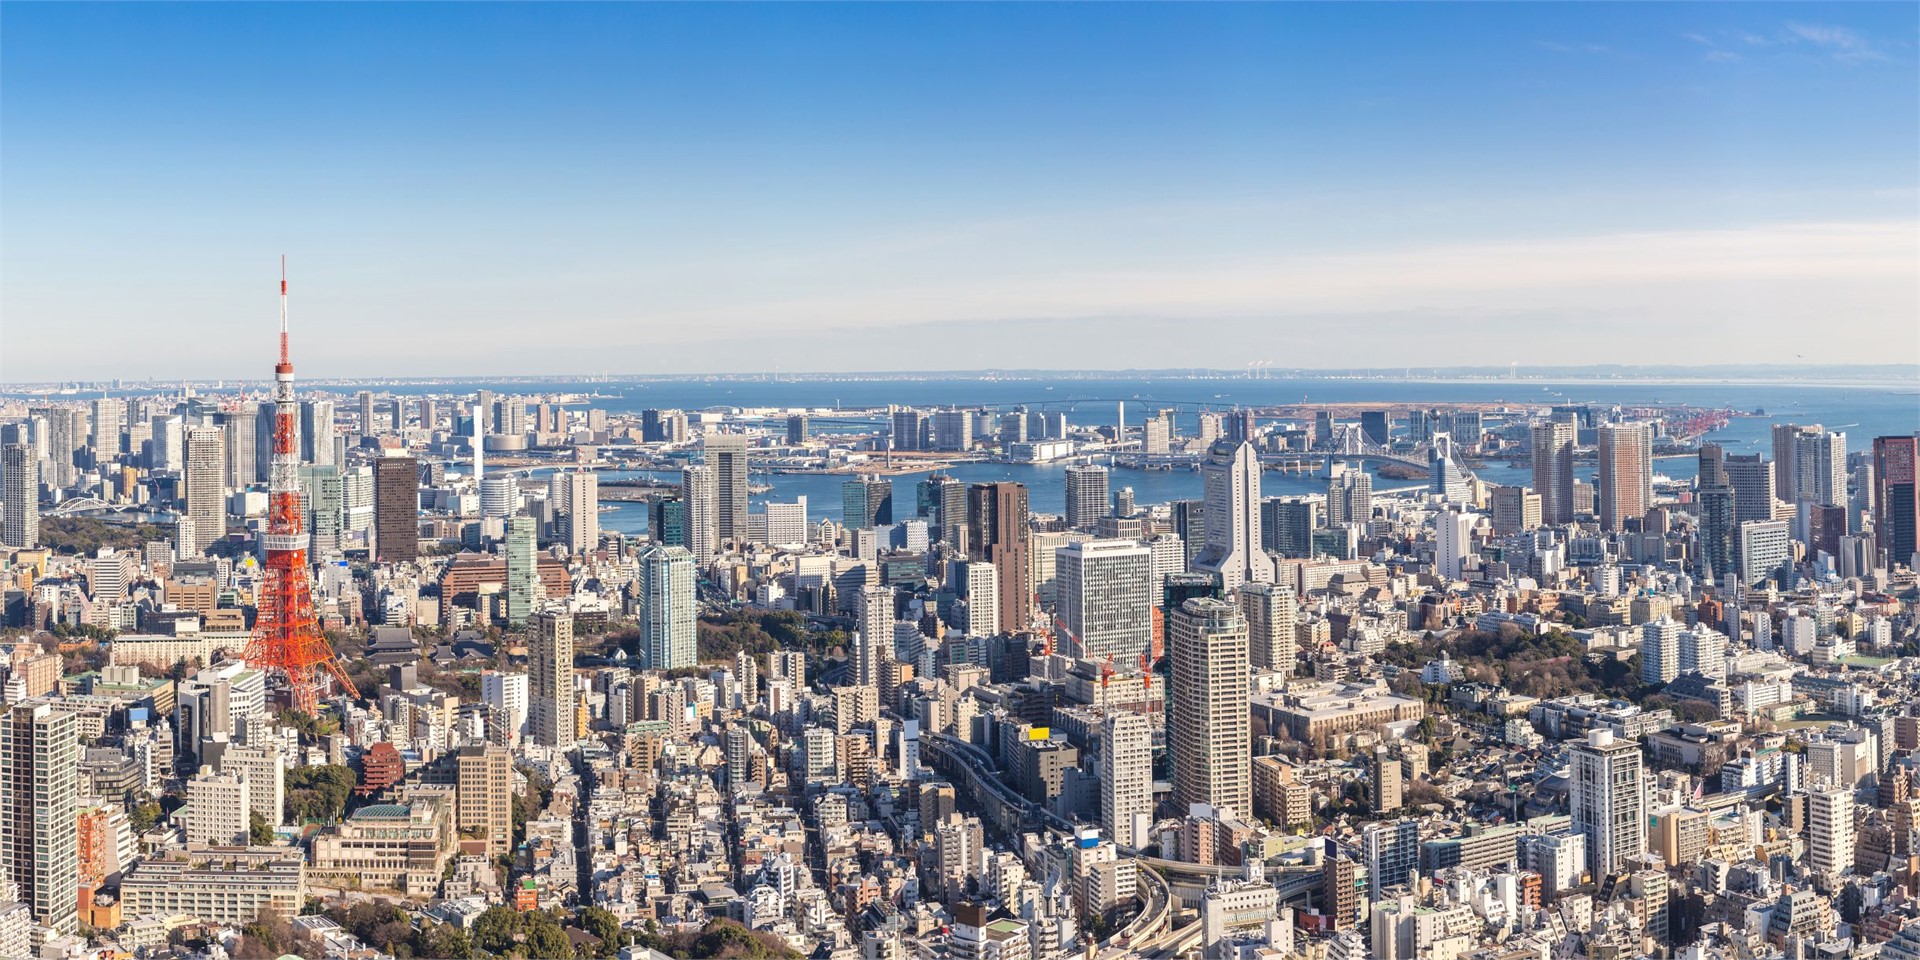 Hotels and accommodation in Tokyo, Japan
